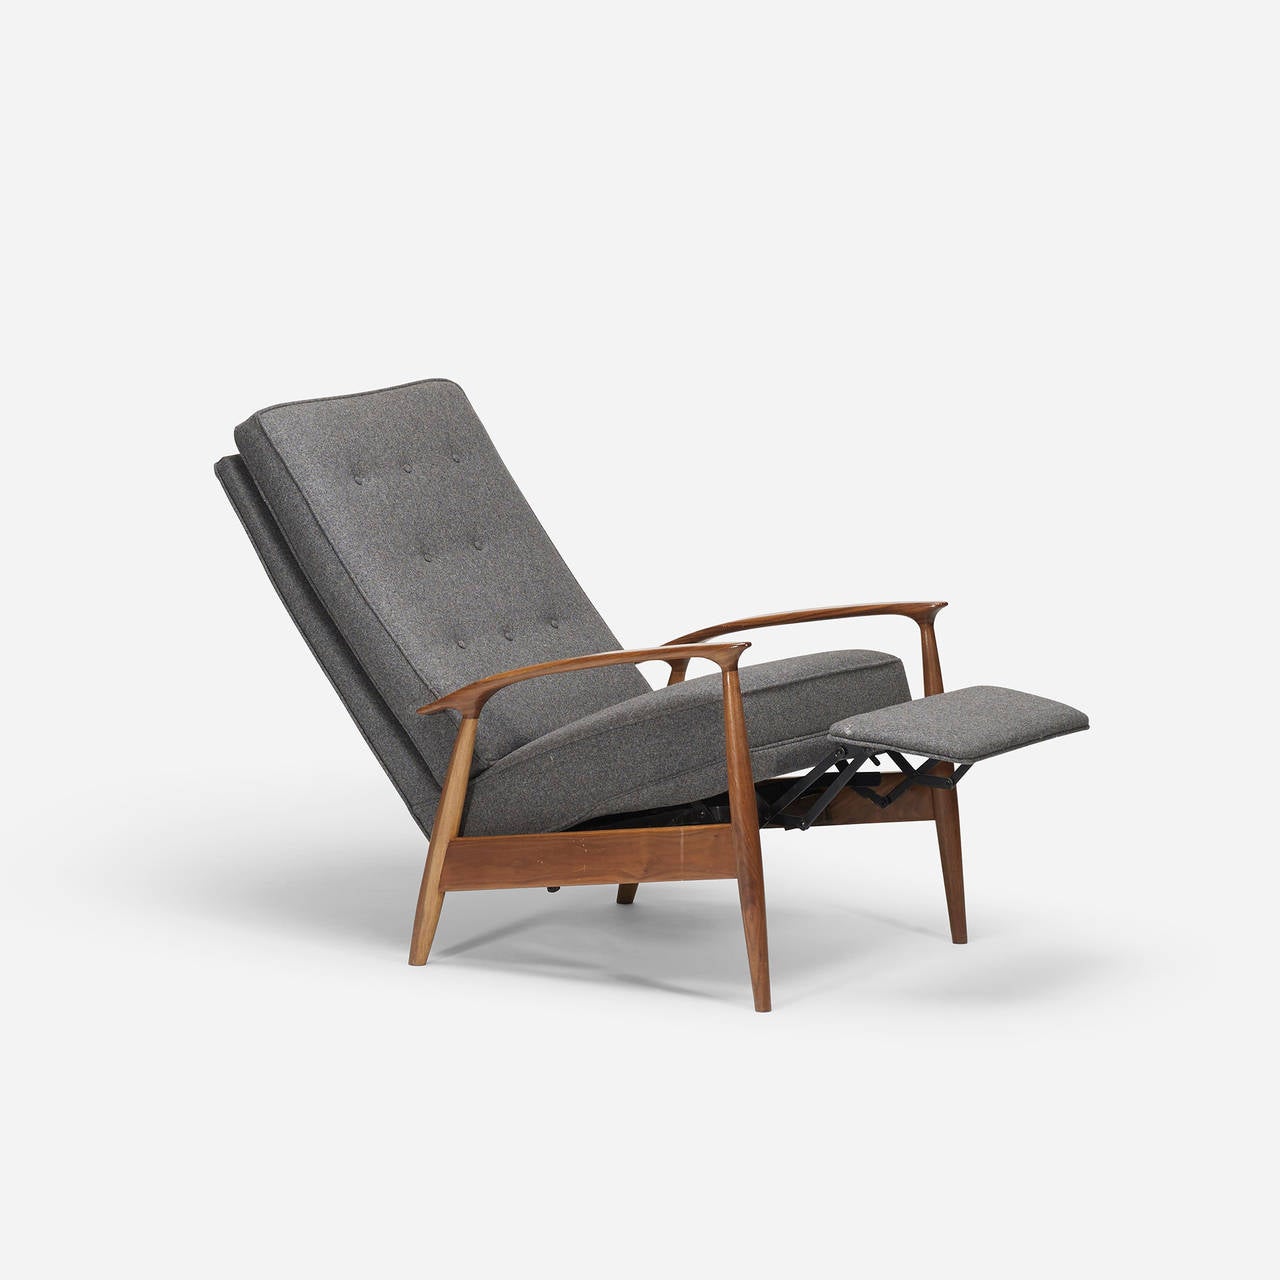 Mid-Century Modern reclining lounge chair by Milo Baughman for Thayer Coggin